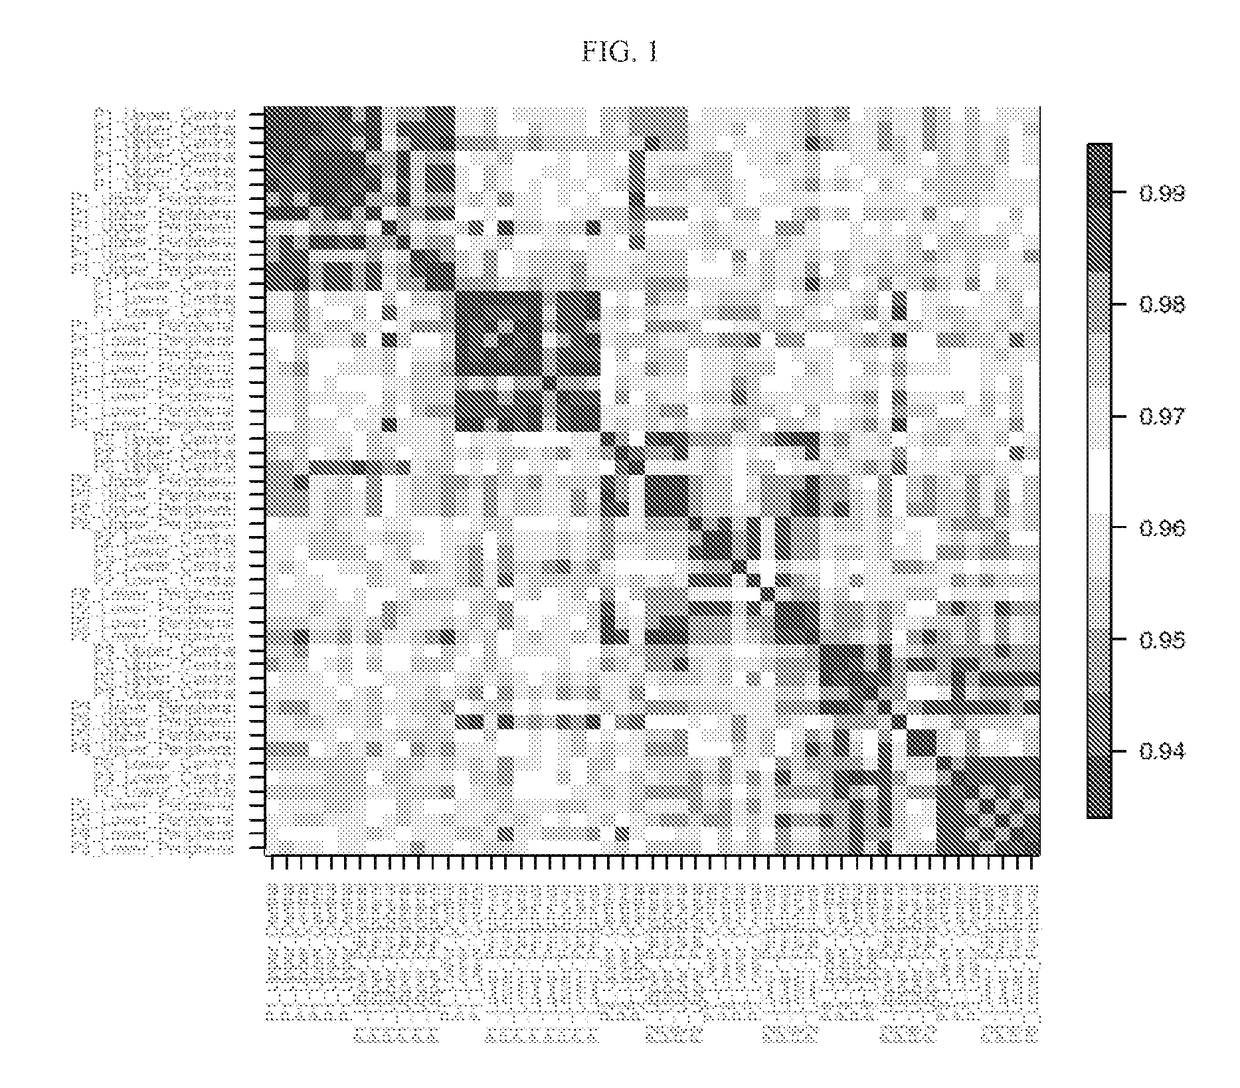 Systems and methods of diagnosing idiopathic pulmonary fibrosis on transbronchial biopsies using machine learning and high dimensional transcriptional data